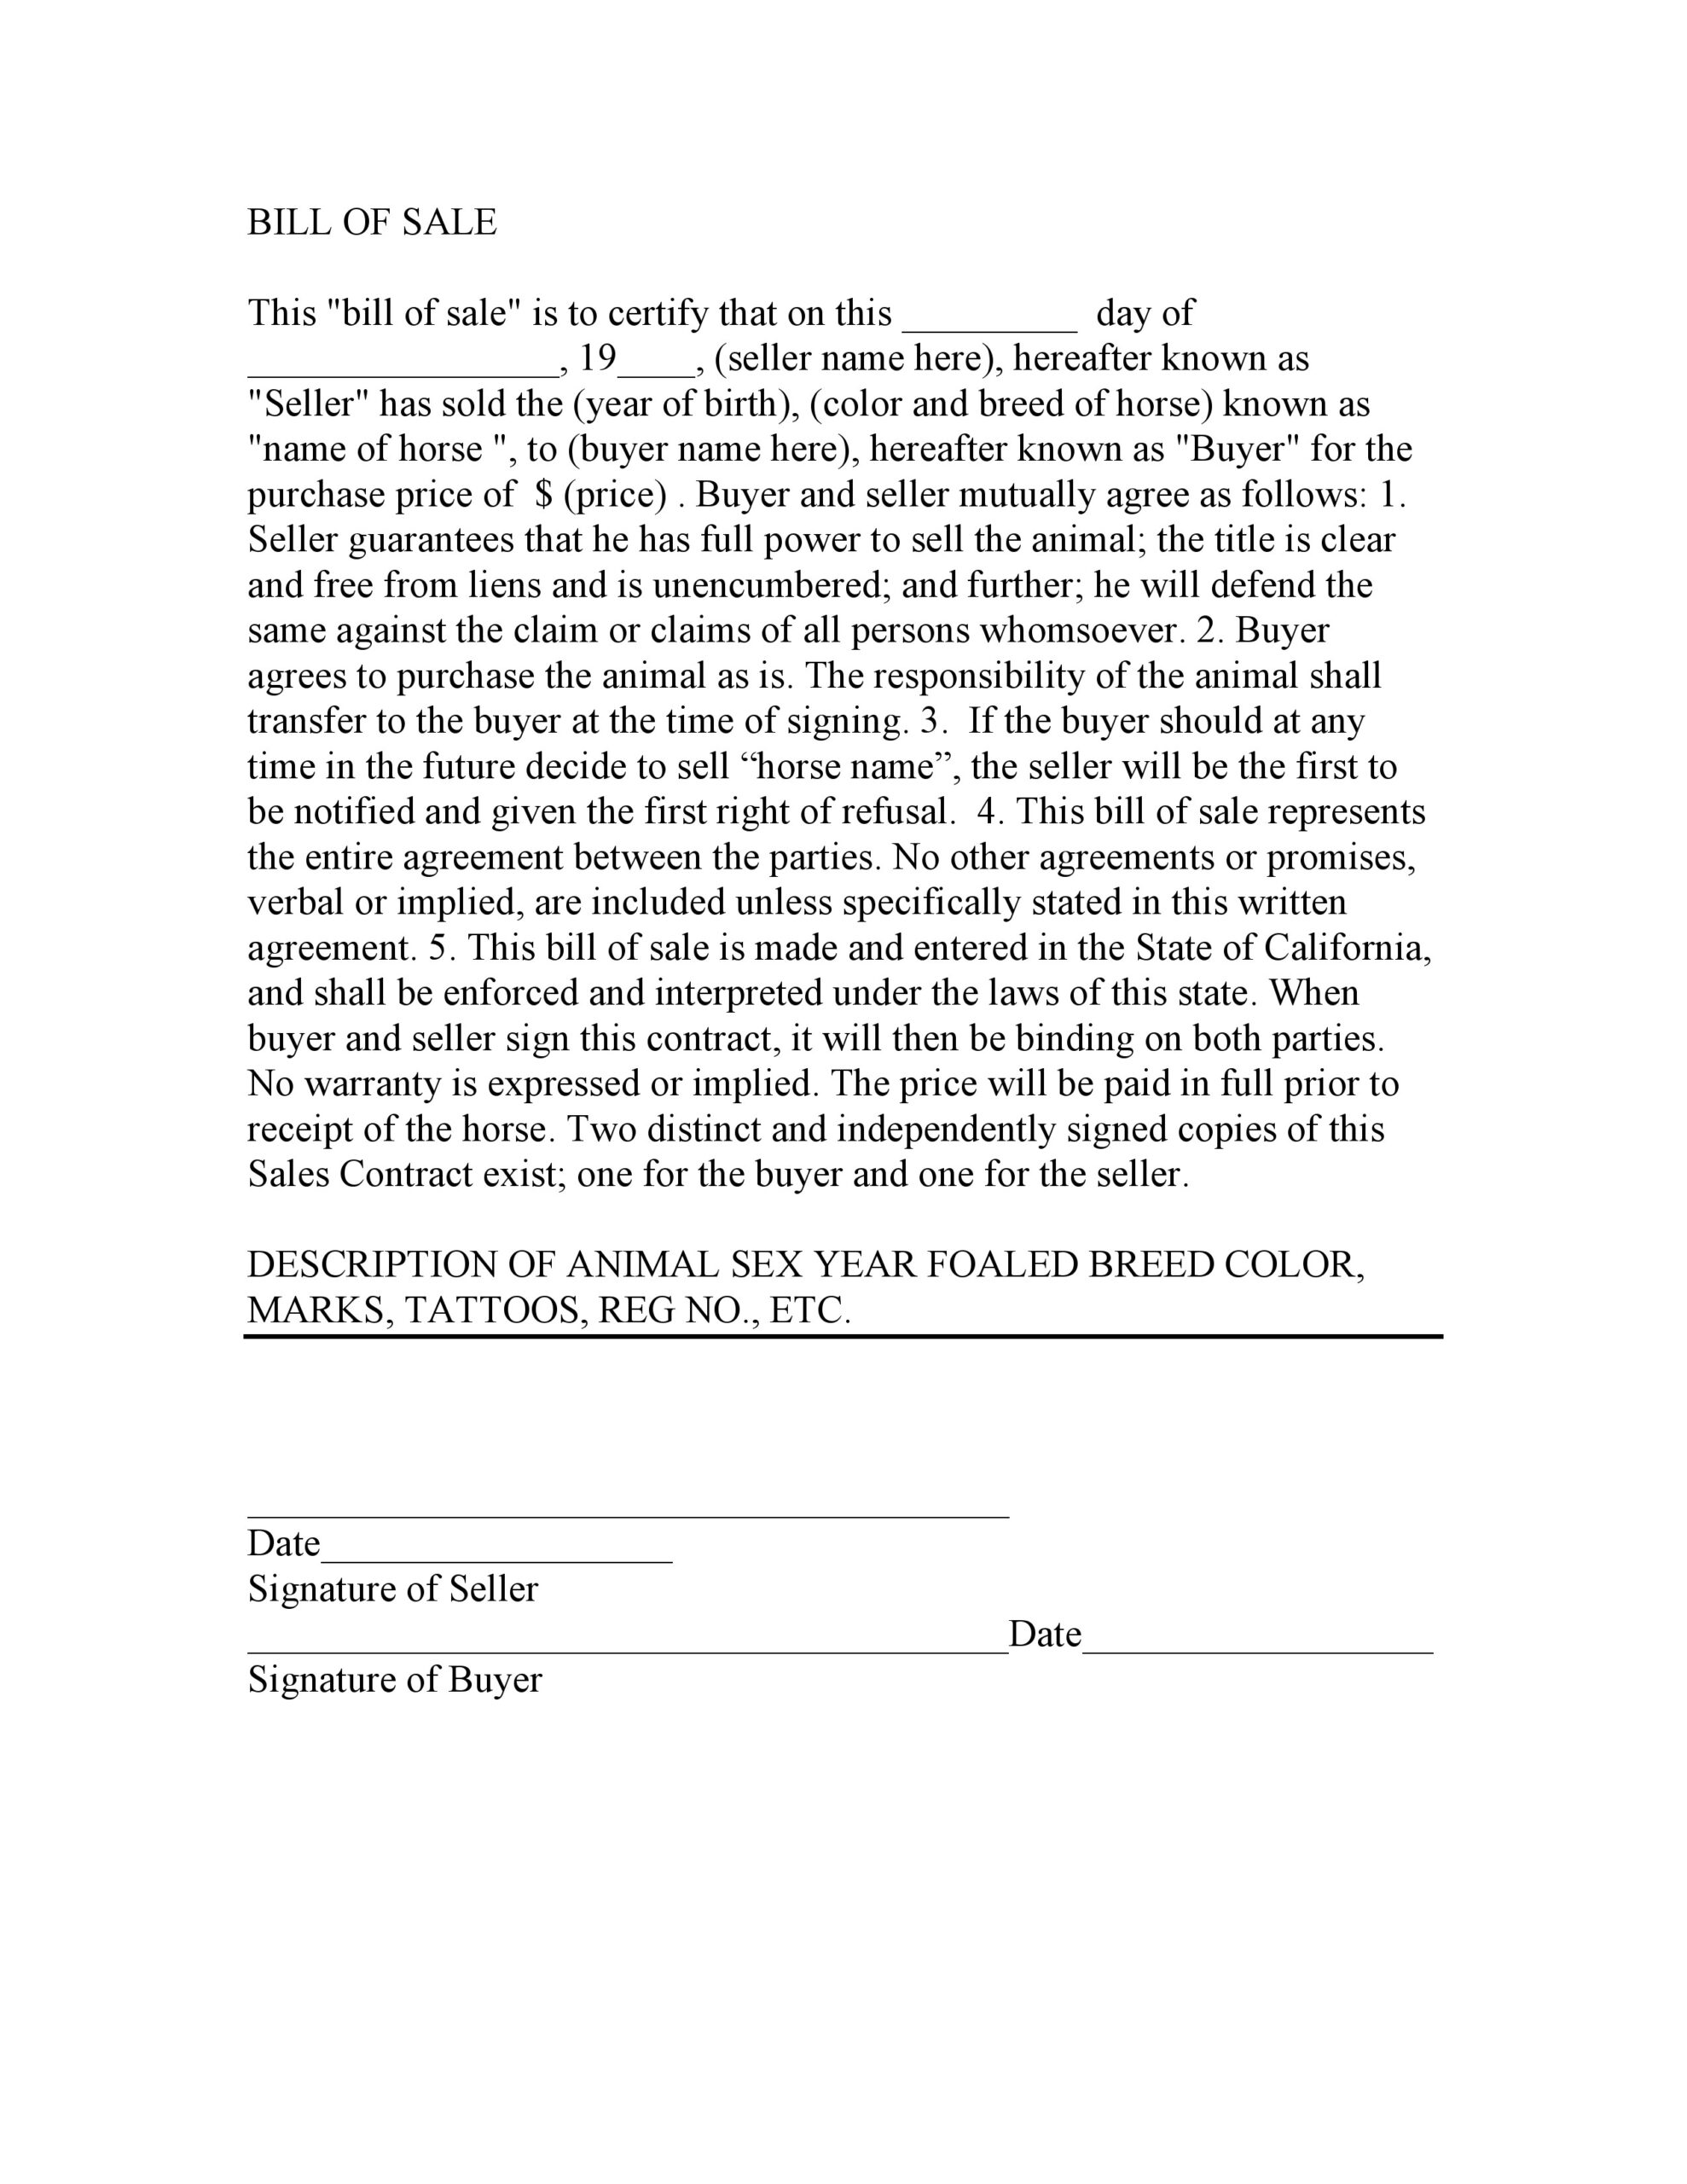 Horse Bill Of Sale. Sample Hourse Bill O Sale Form. Equine Throughout Horse Bill Of Sale Template